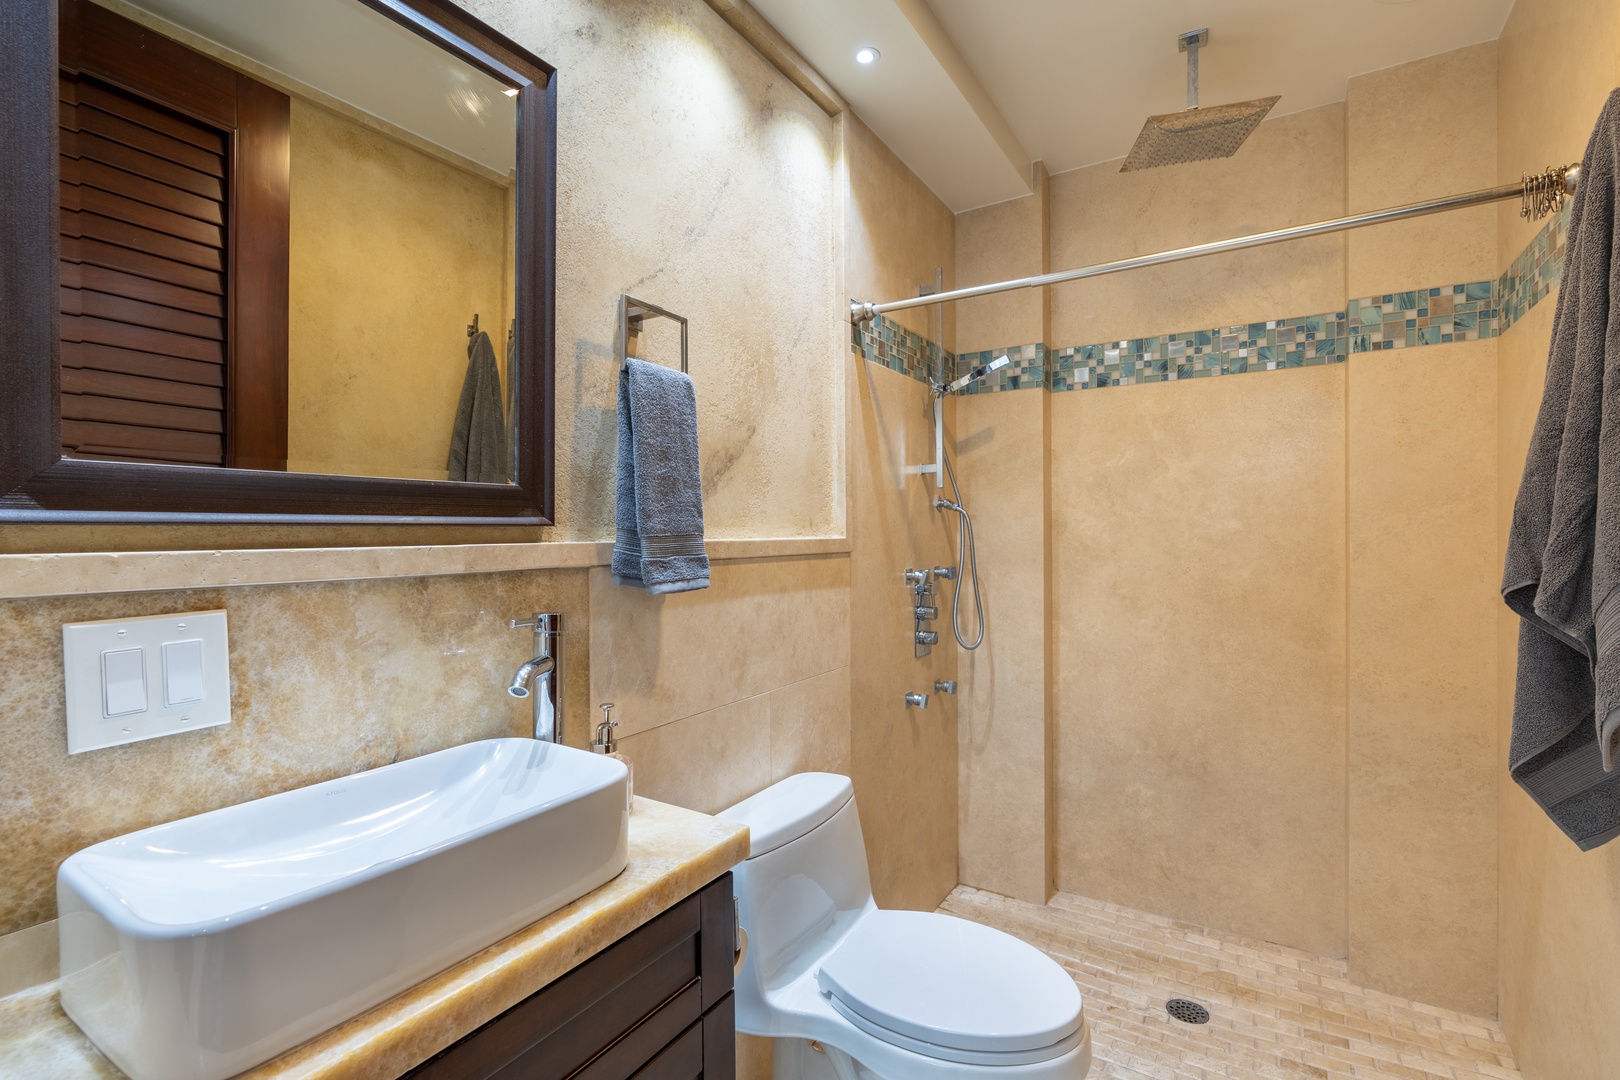 Honolulu Vacation Rentals, Wailupe Seaside - A bathroom with a walk-in shower is just around the corner.